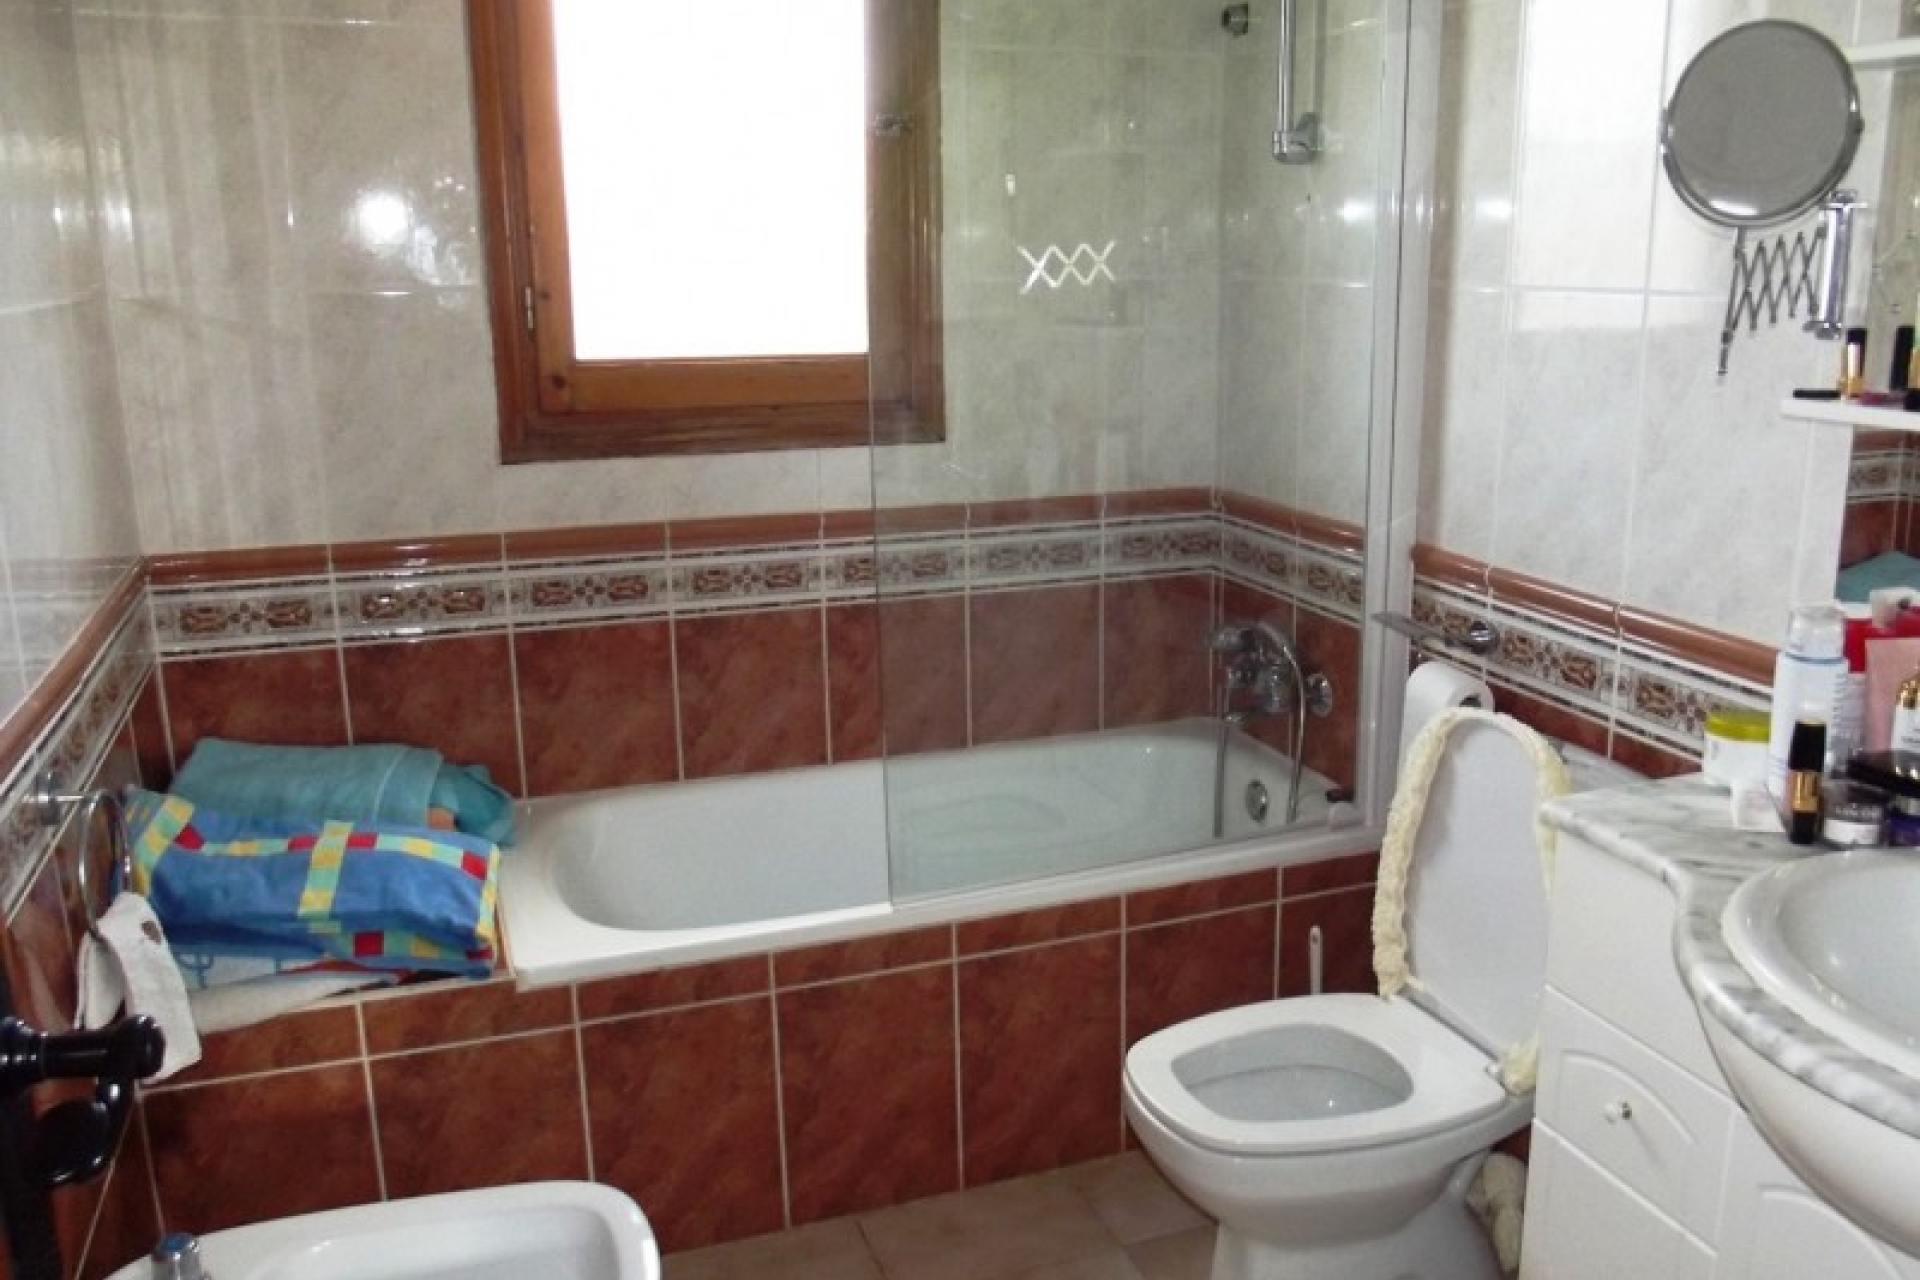 For sale on Spains Costa Blanca, close to Torrevieja and La Siesta, cheap, bargain Villa, for sale property in San Luis